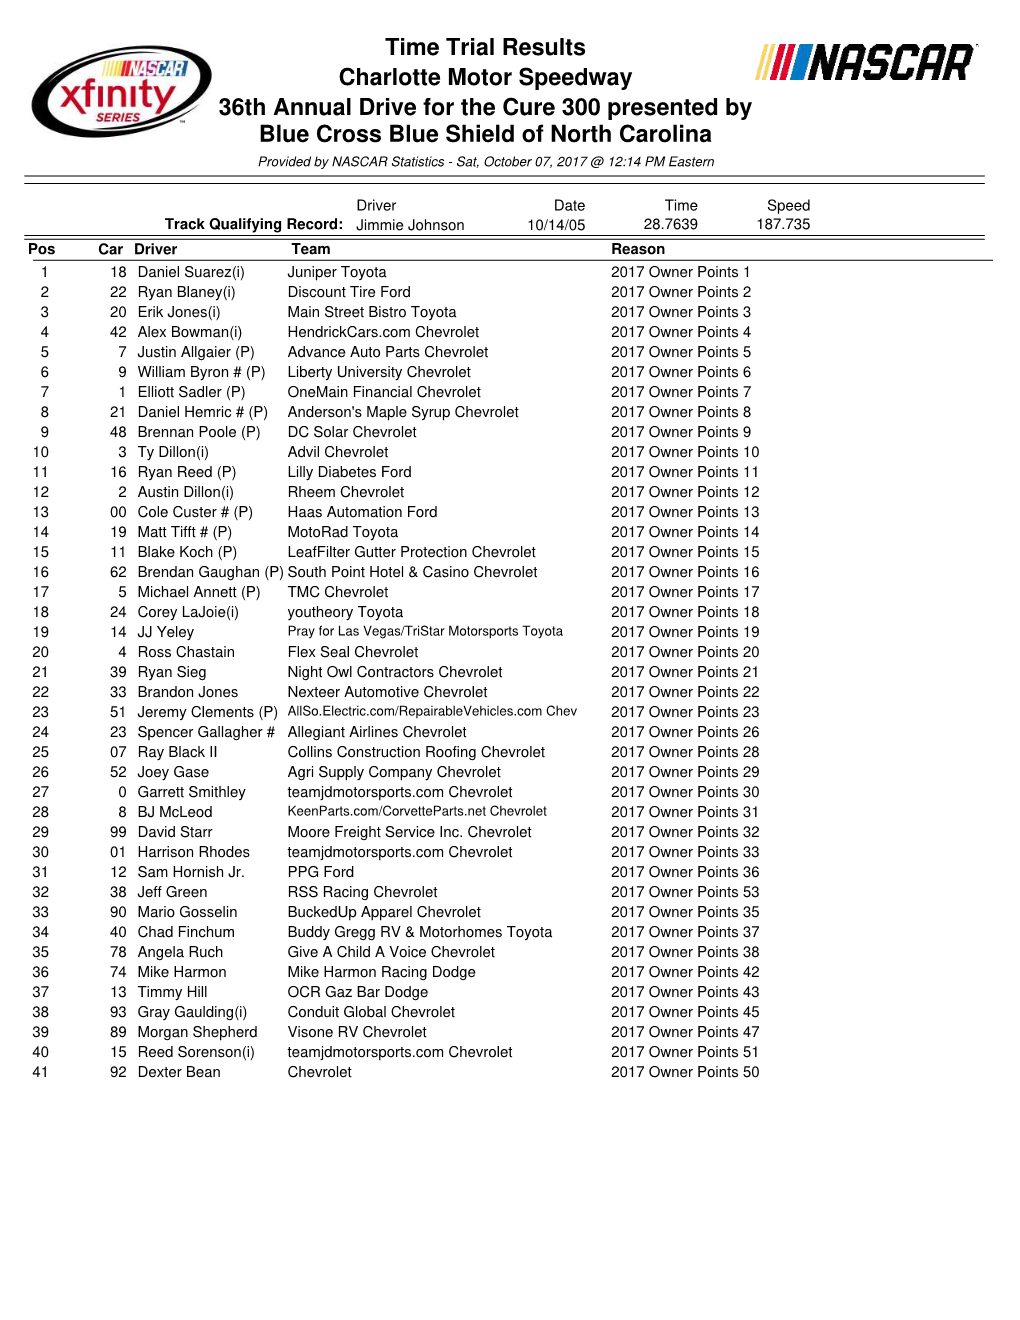 Time Trial Results Charlotte Motor Speedway 36Th Annual Drive For